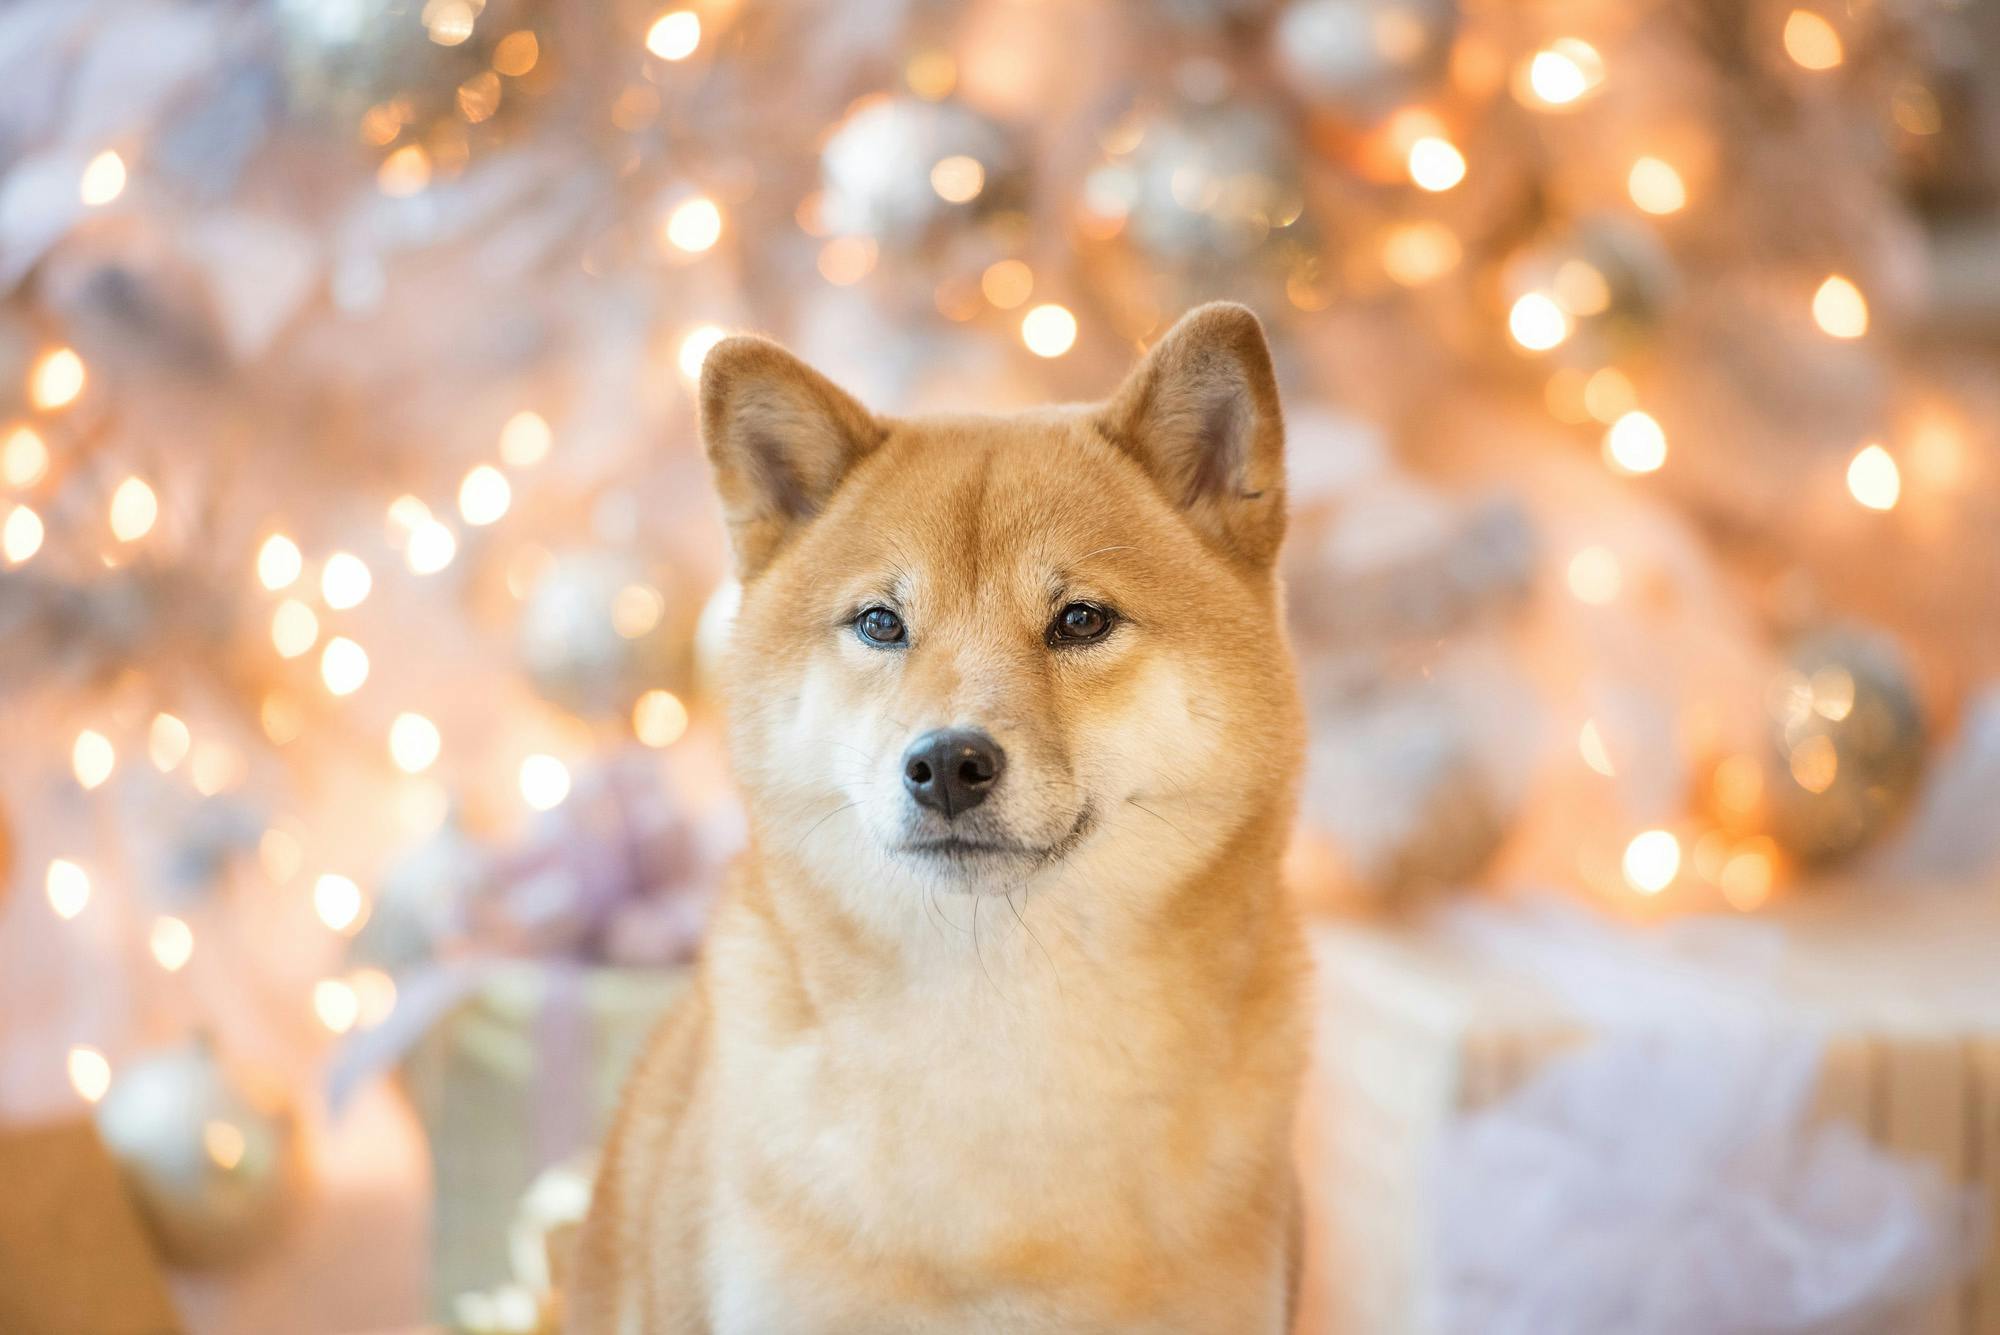 Siba inu at Christmas Time in front of a lighted tree